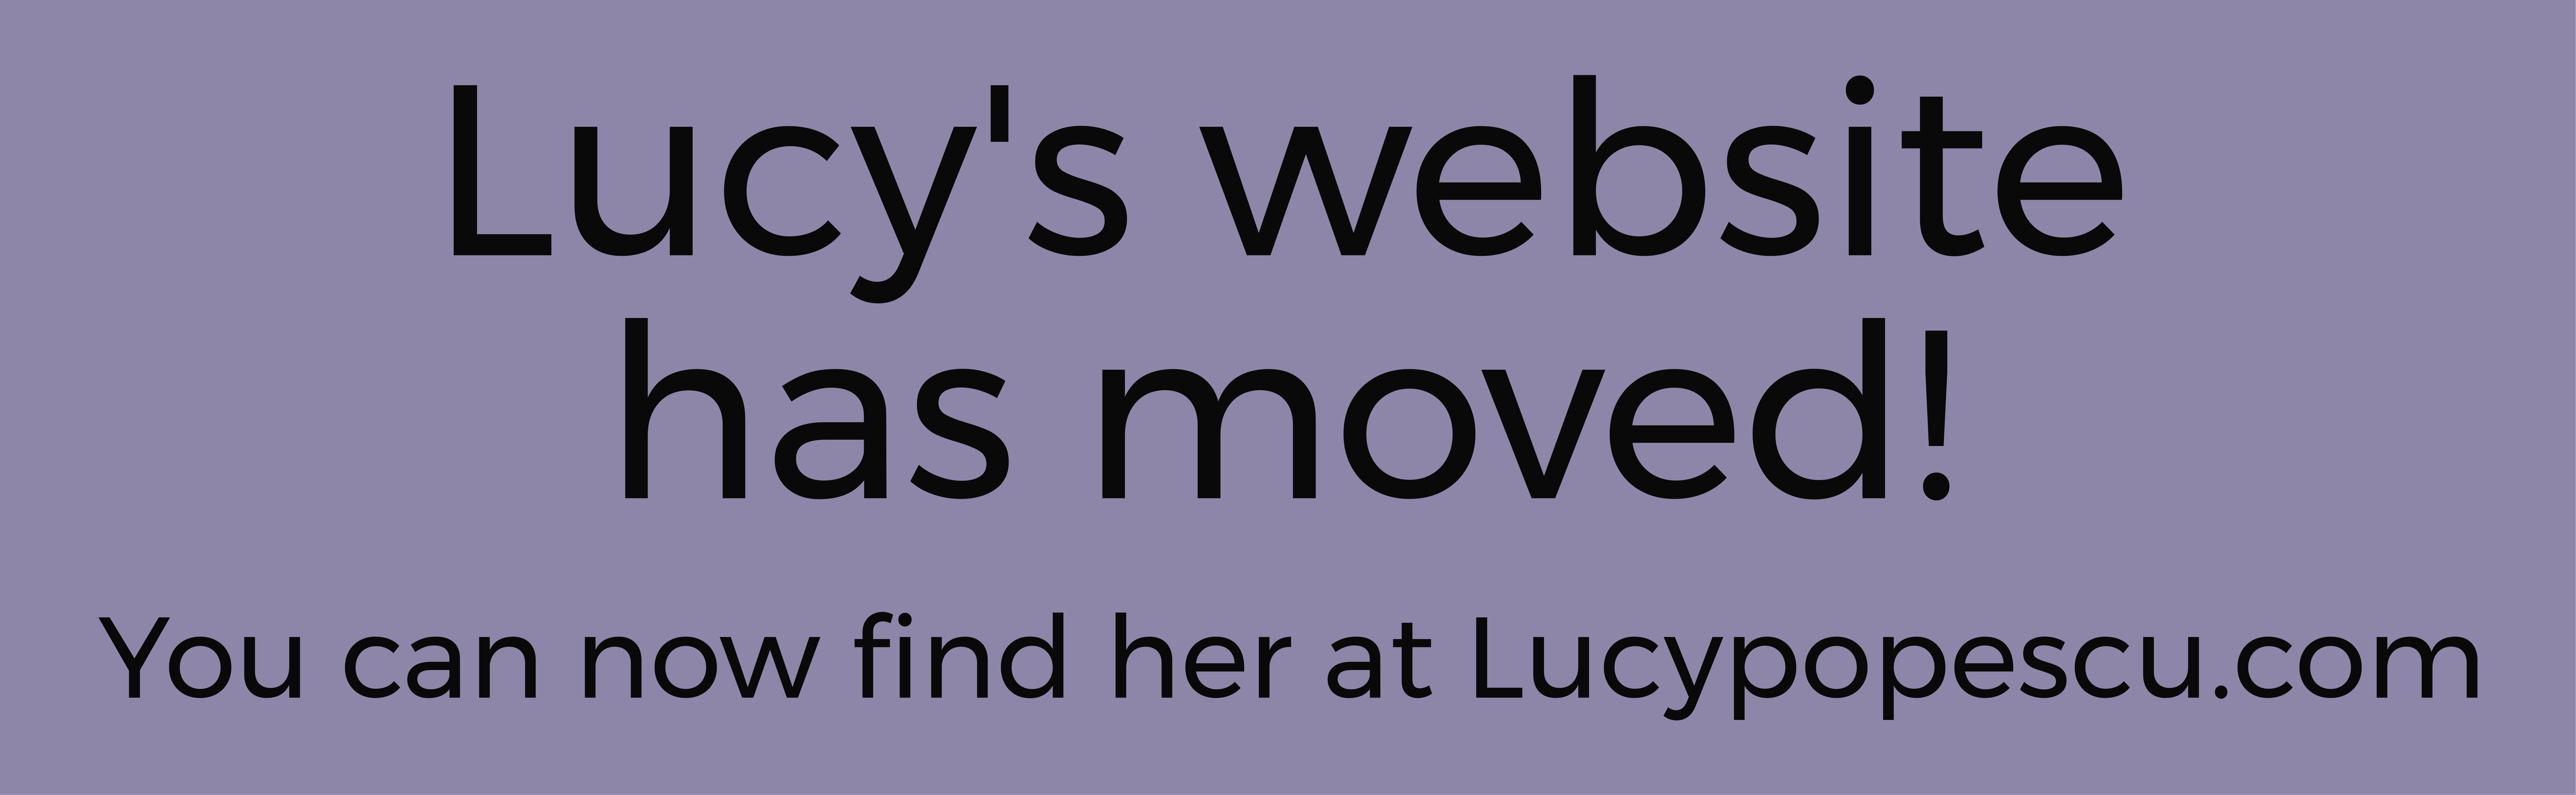 Find Lucy's new website at Lucypopescu.com